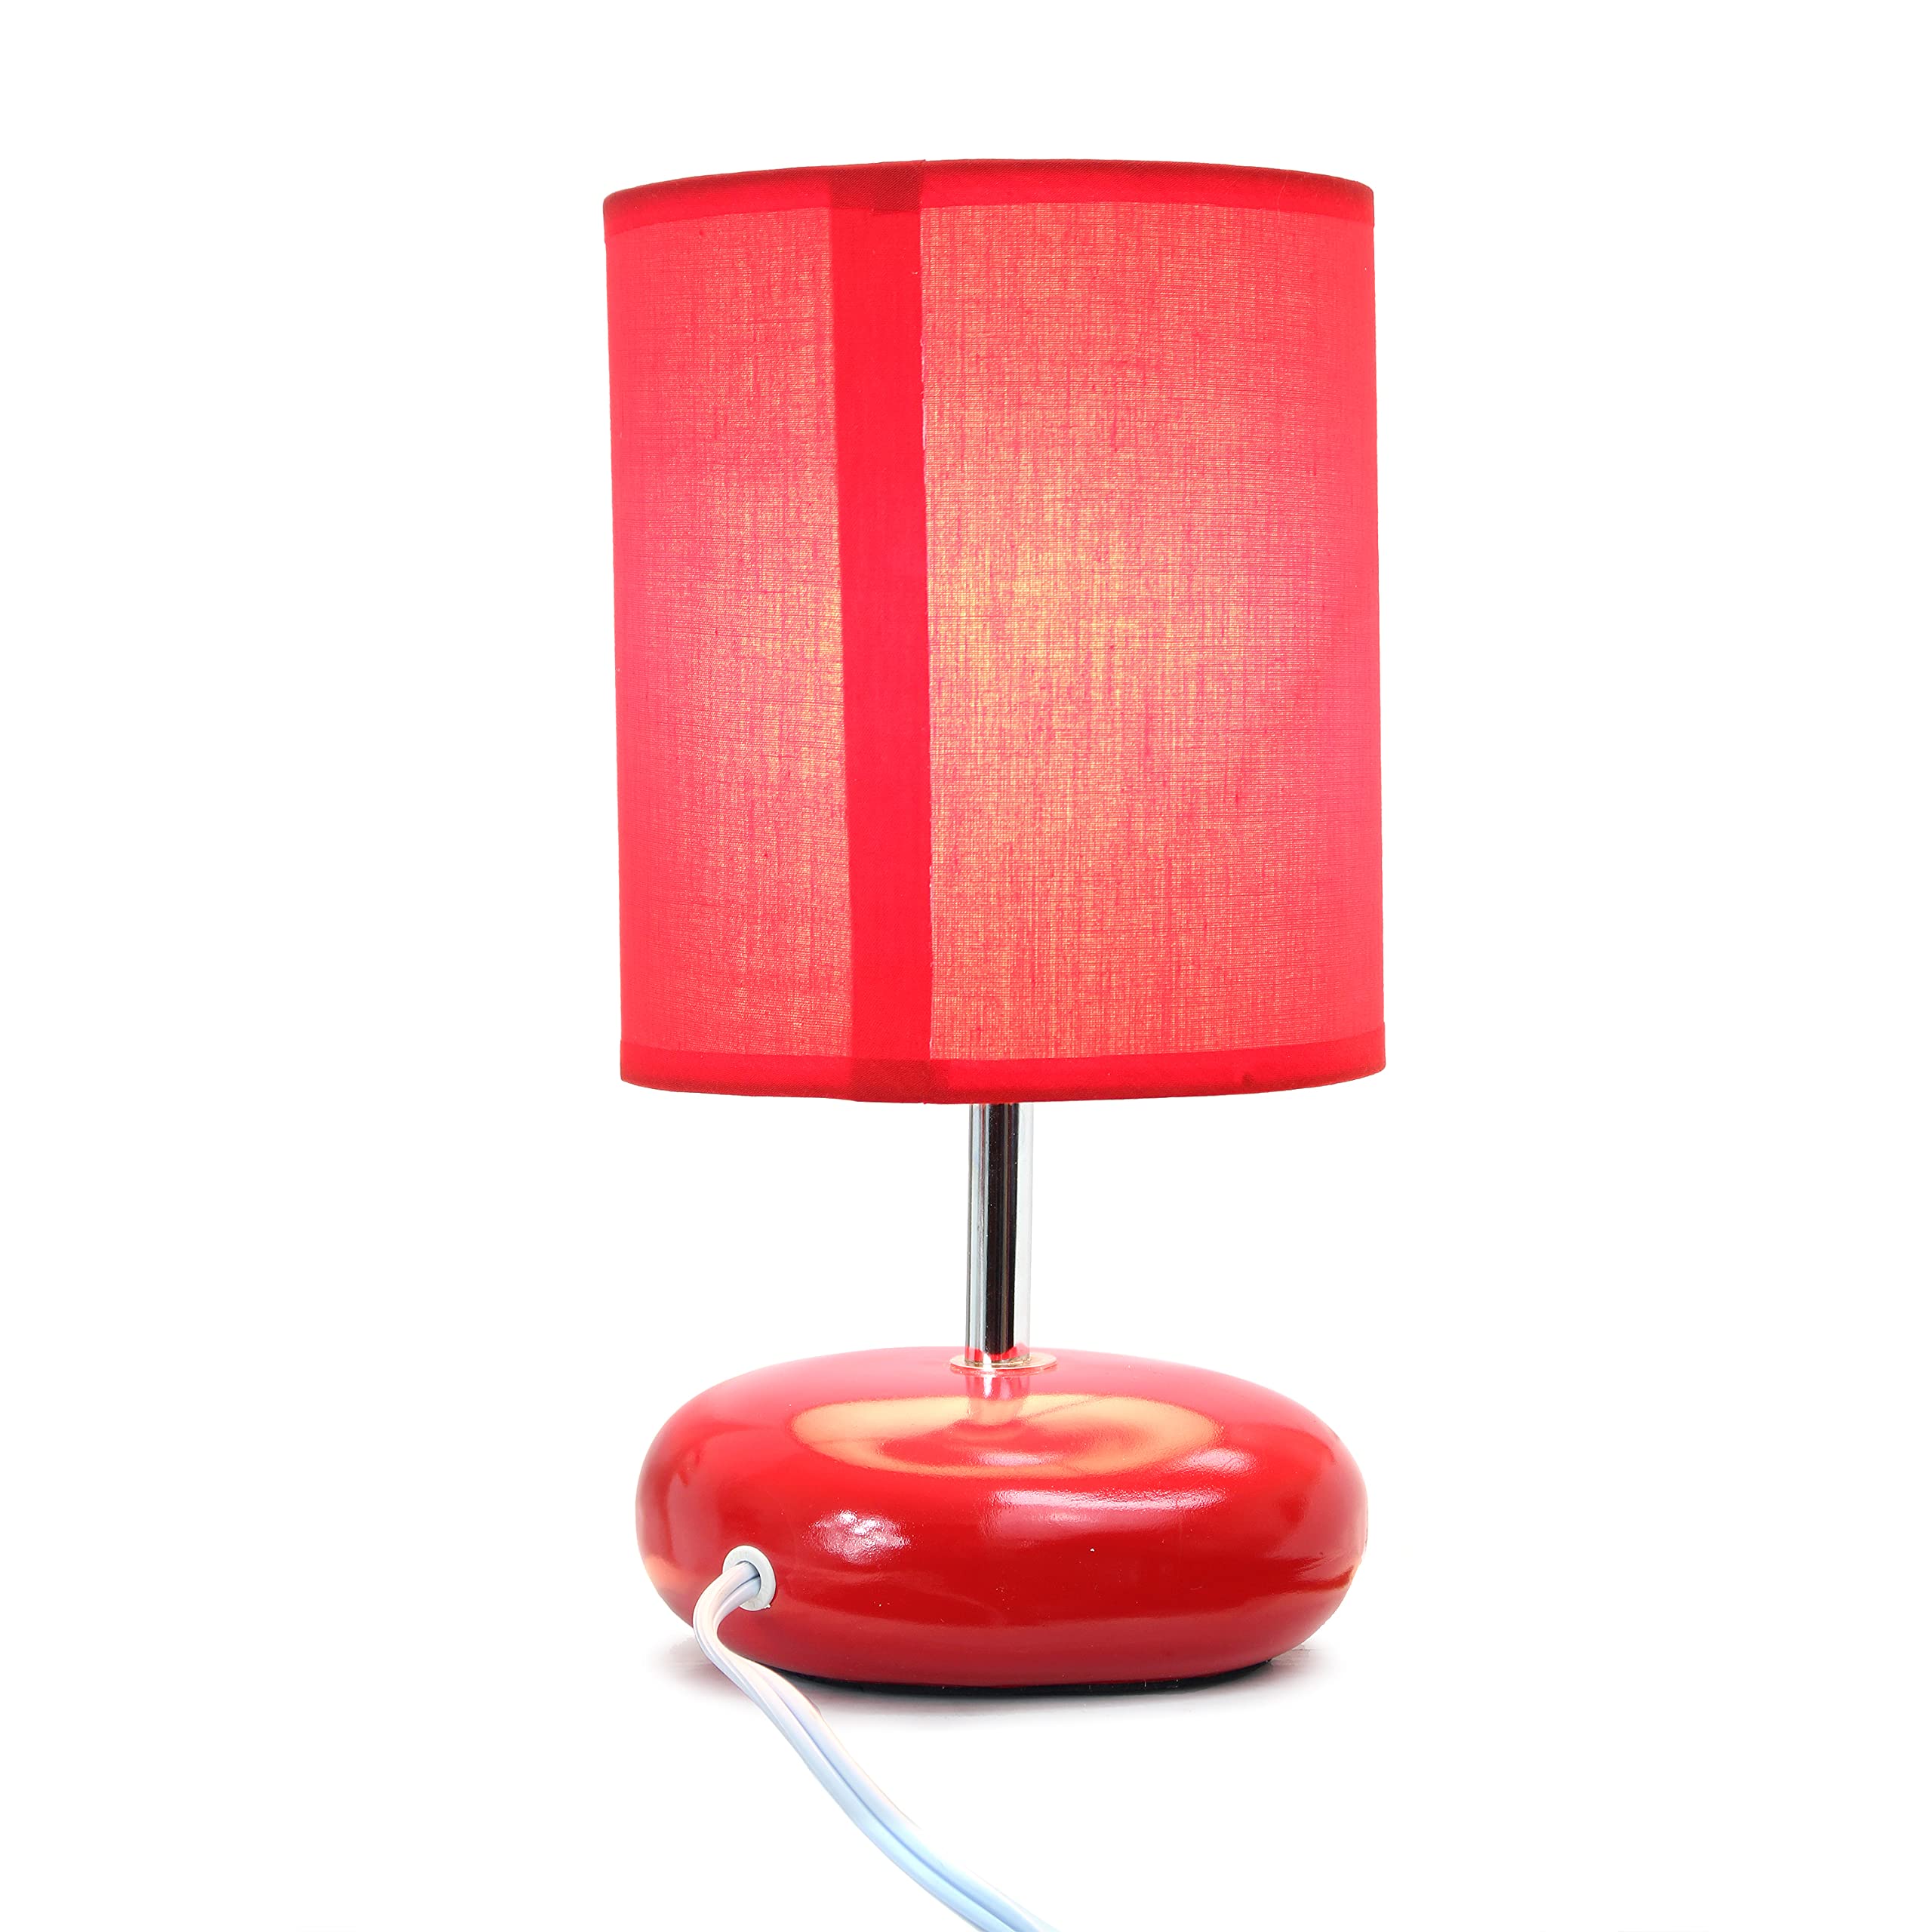 Simple Designs LT2005-RED-2PK Stonies Small Stone Look Table Desk Bedside 2 Pack Lamp Set, Red